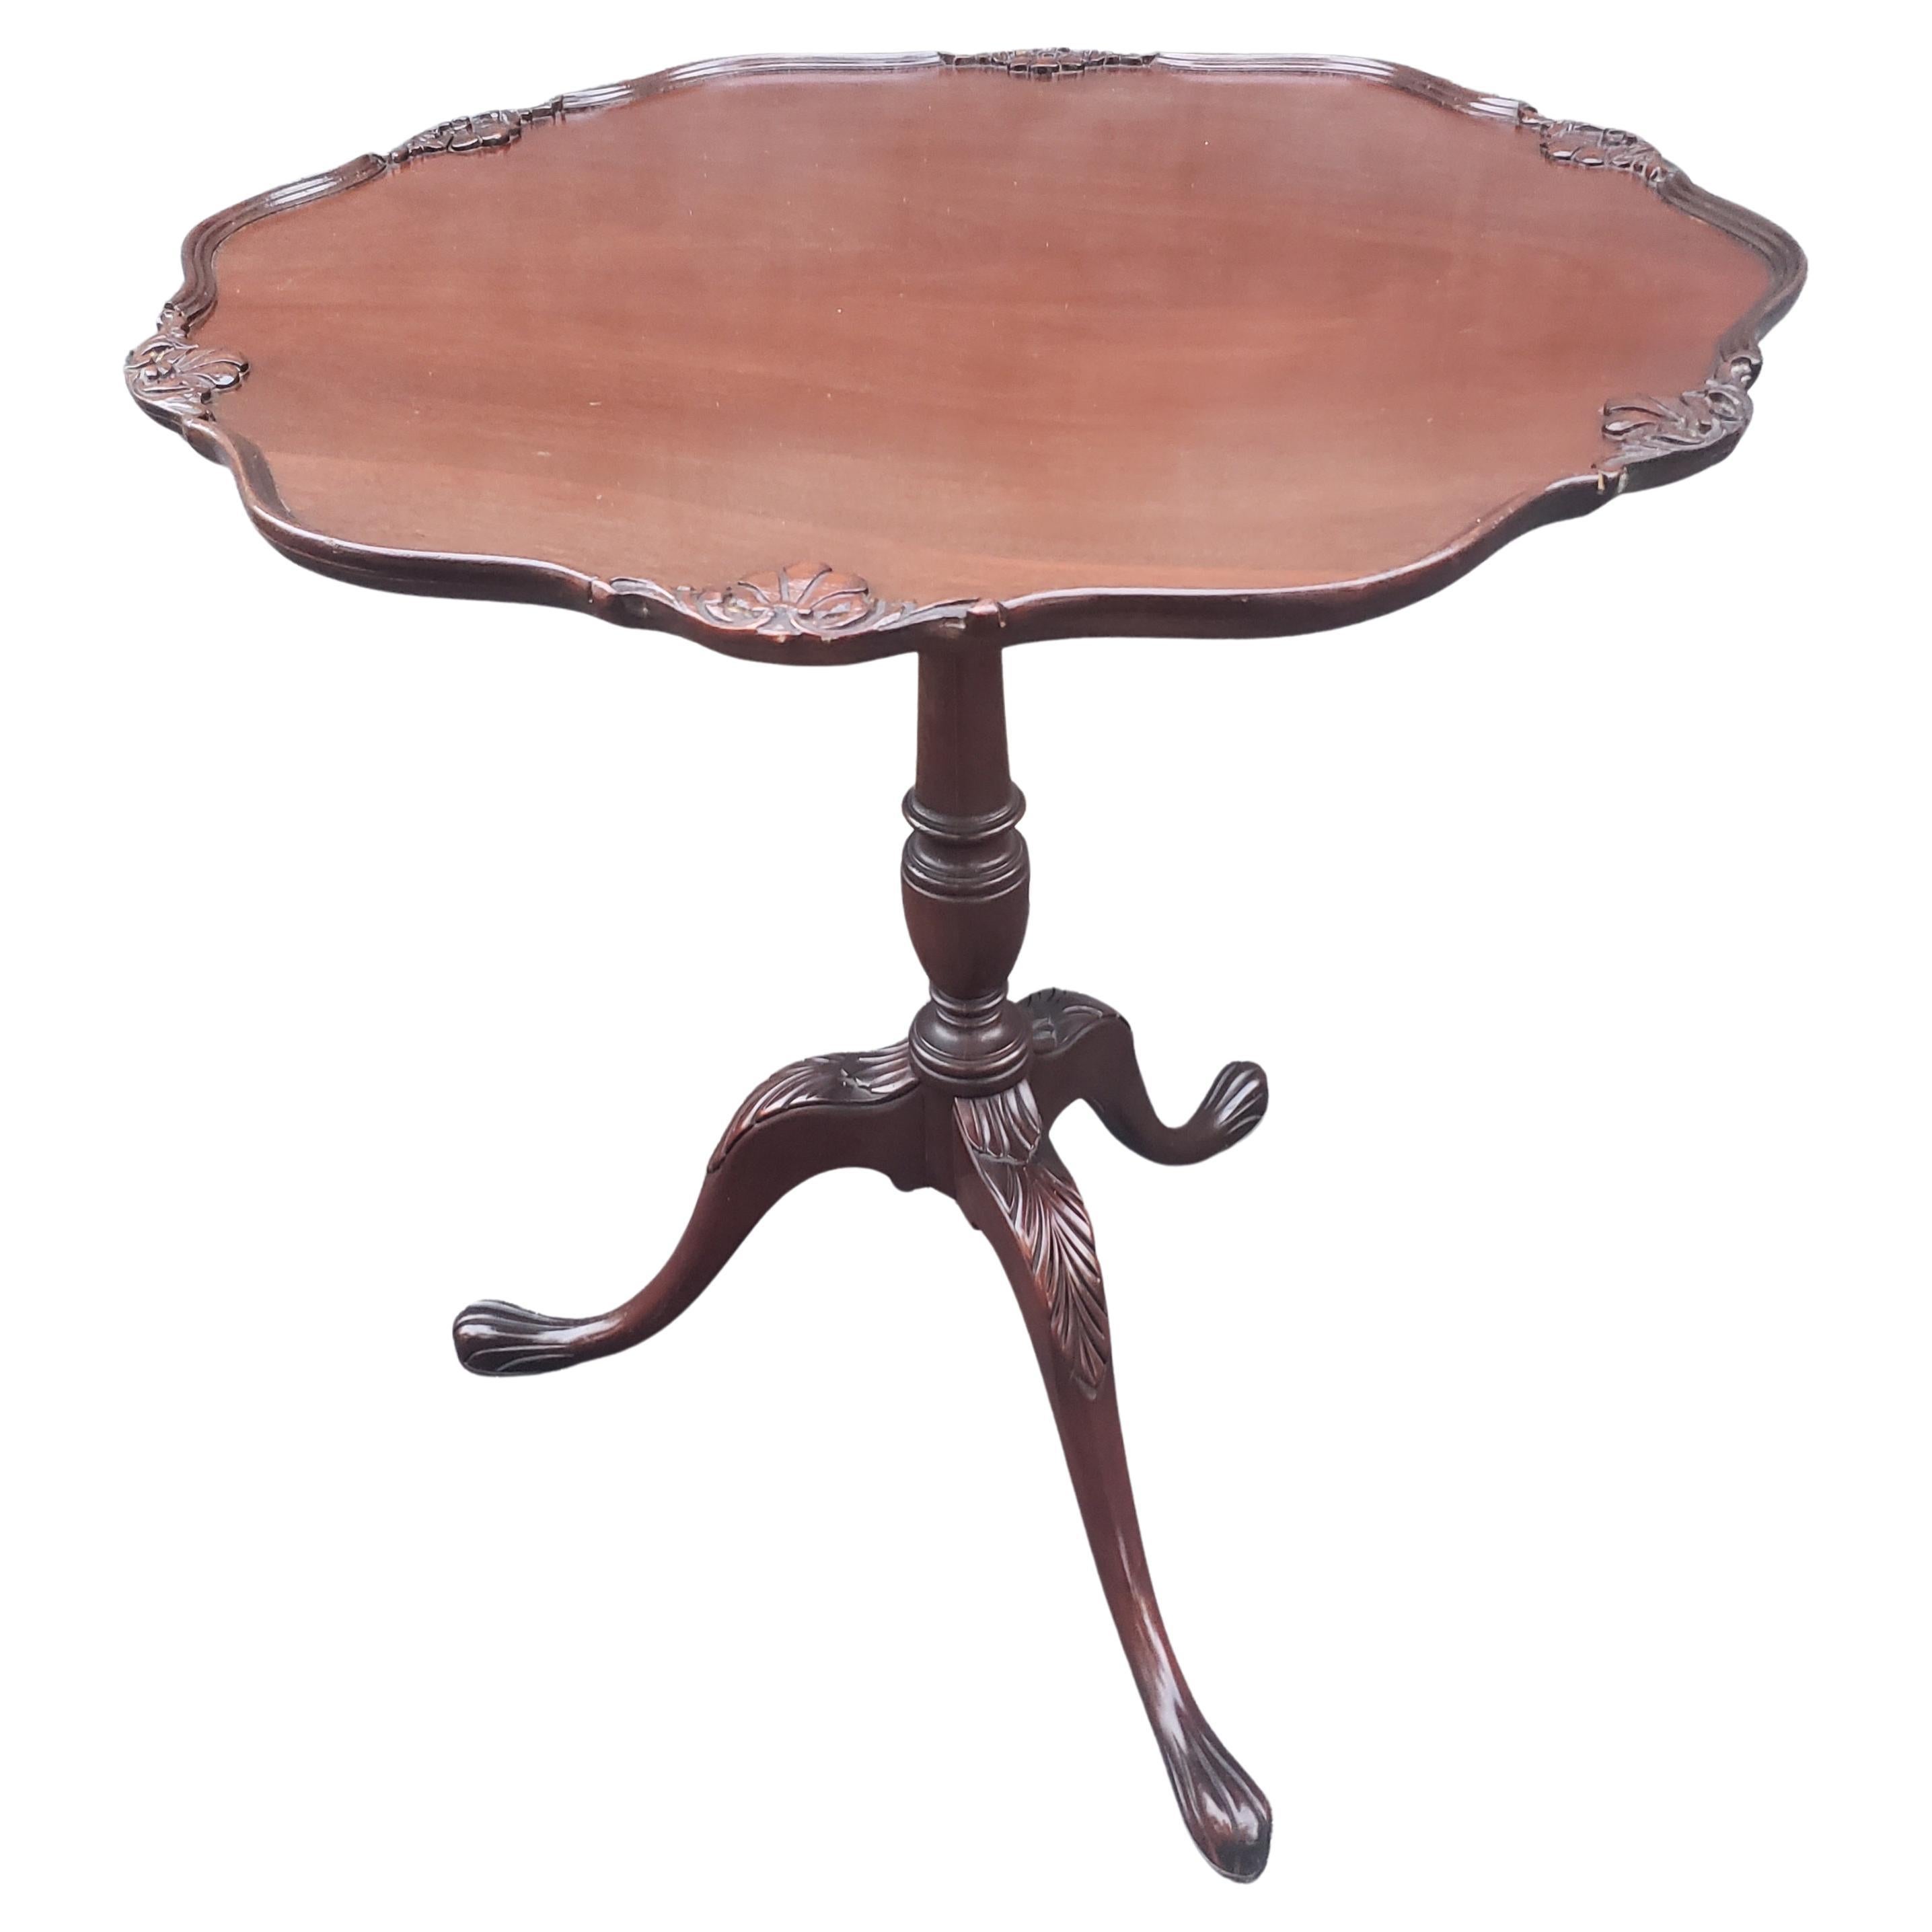 Early 20th century hand carved mahogany tilt-top pie crust desert or tea table In very good condition. Measures 26